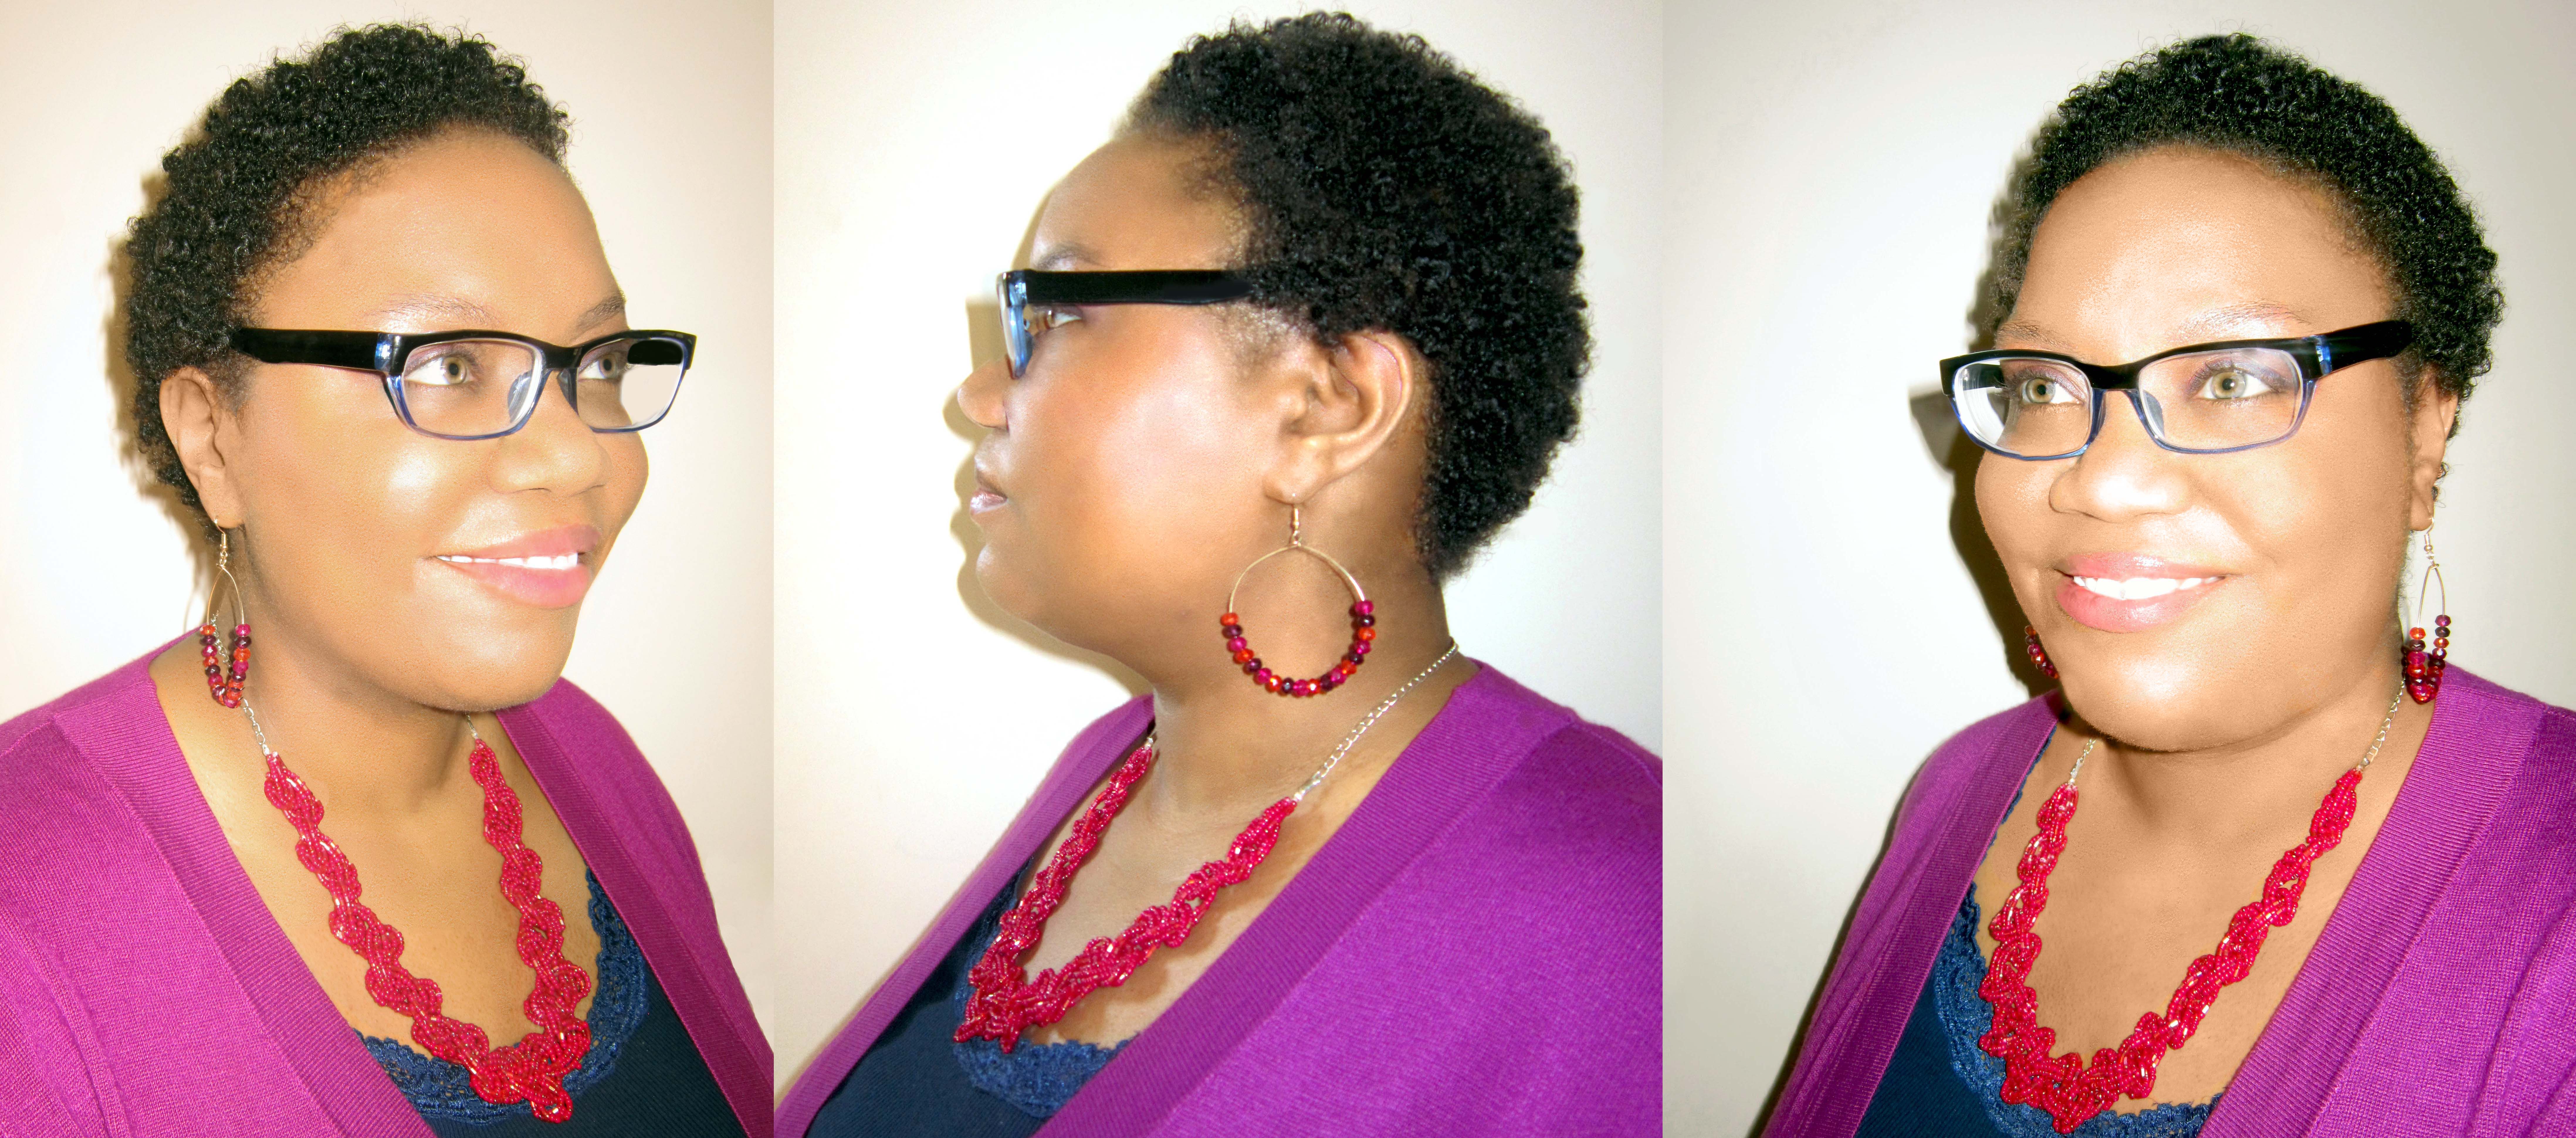 Twist-out on 4-inch Hair | Relaxed. Transitioning. Natural. Beautiful.